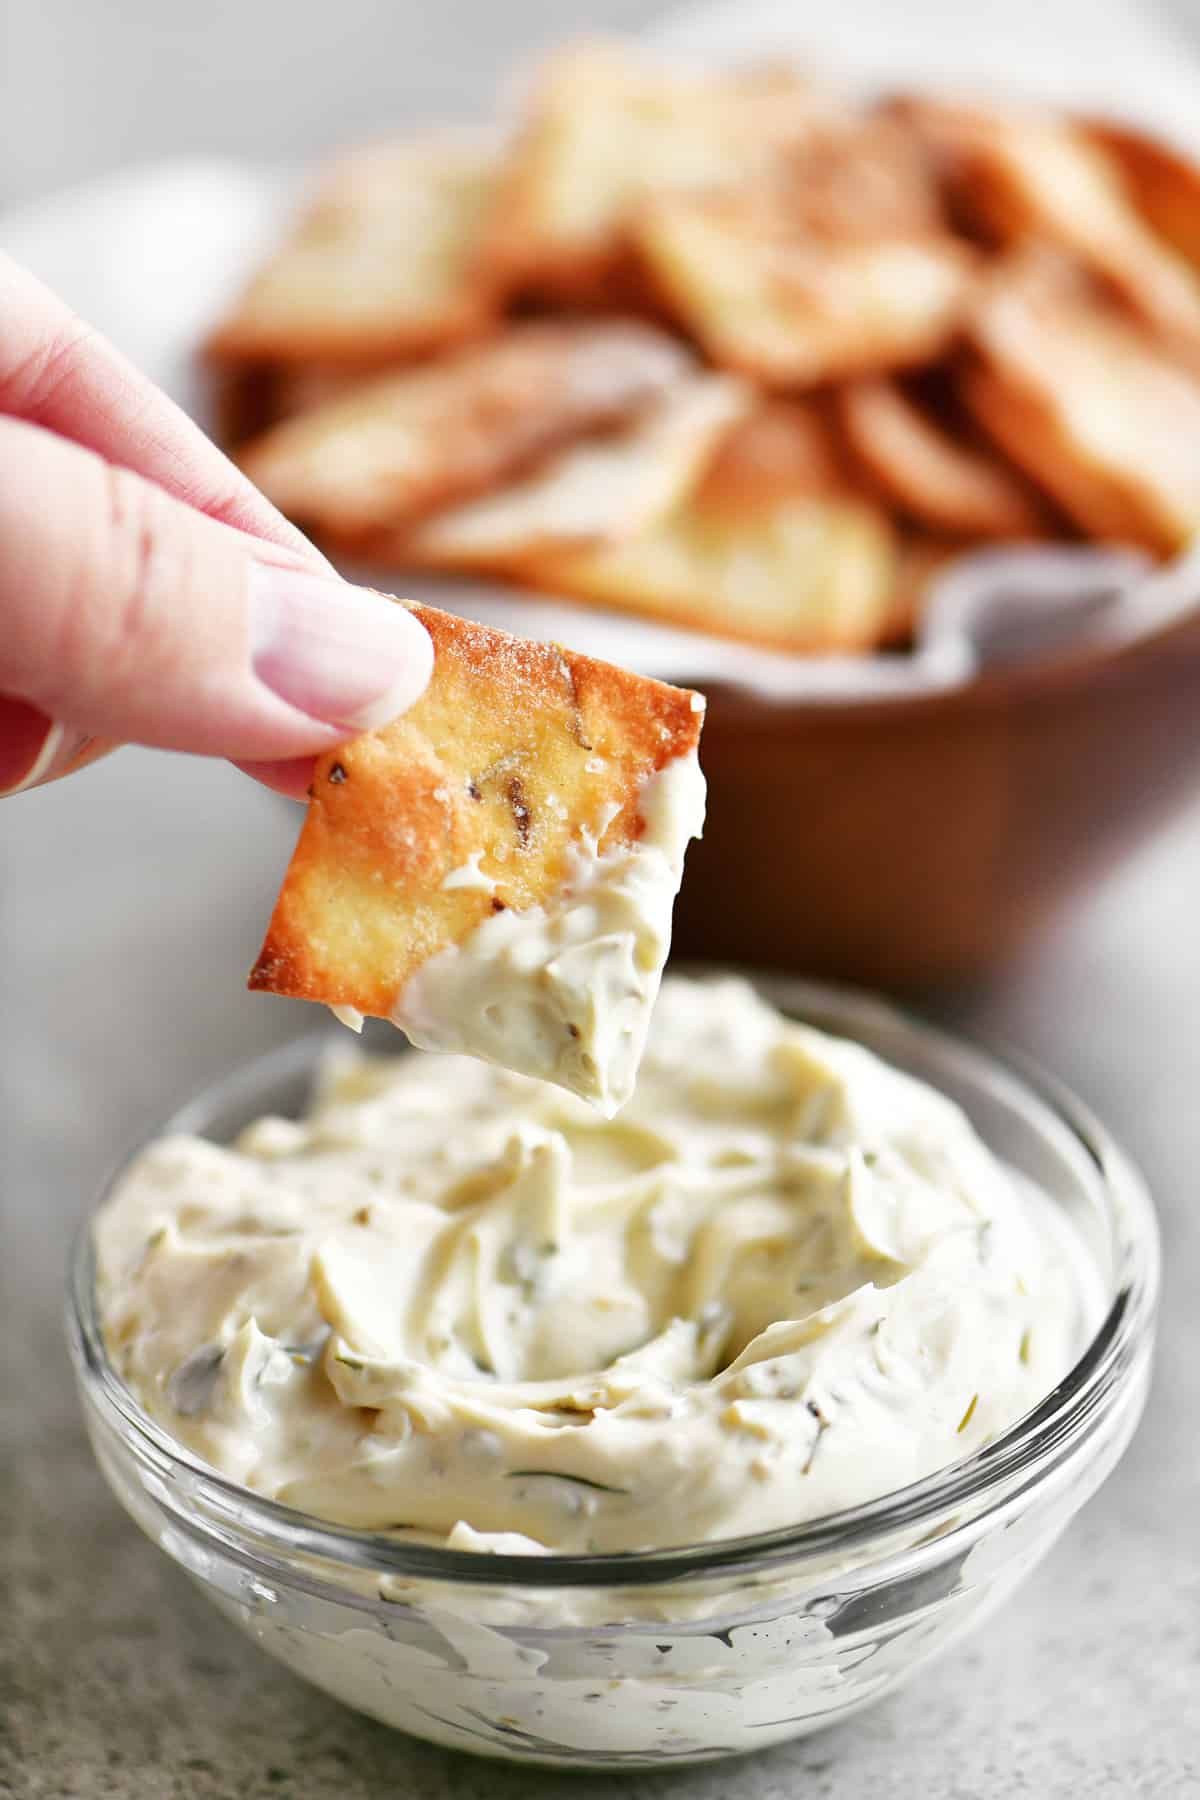 dipping a cracker in dip